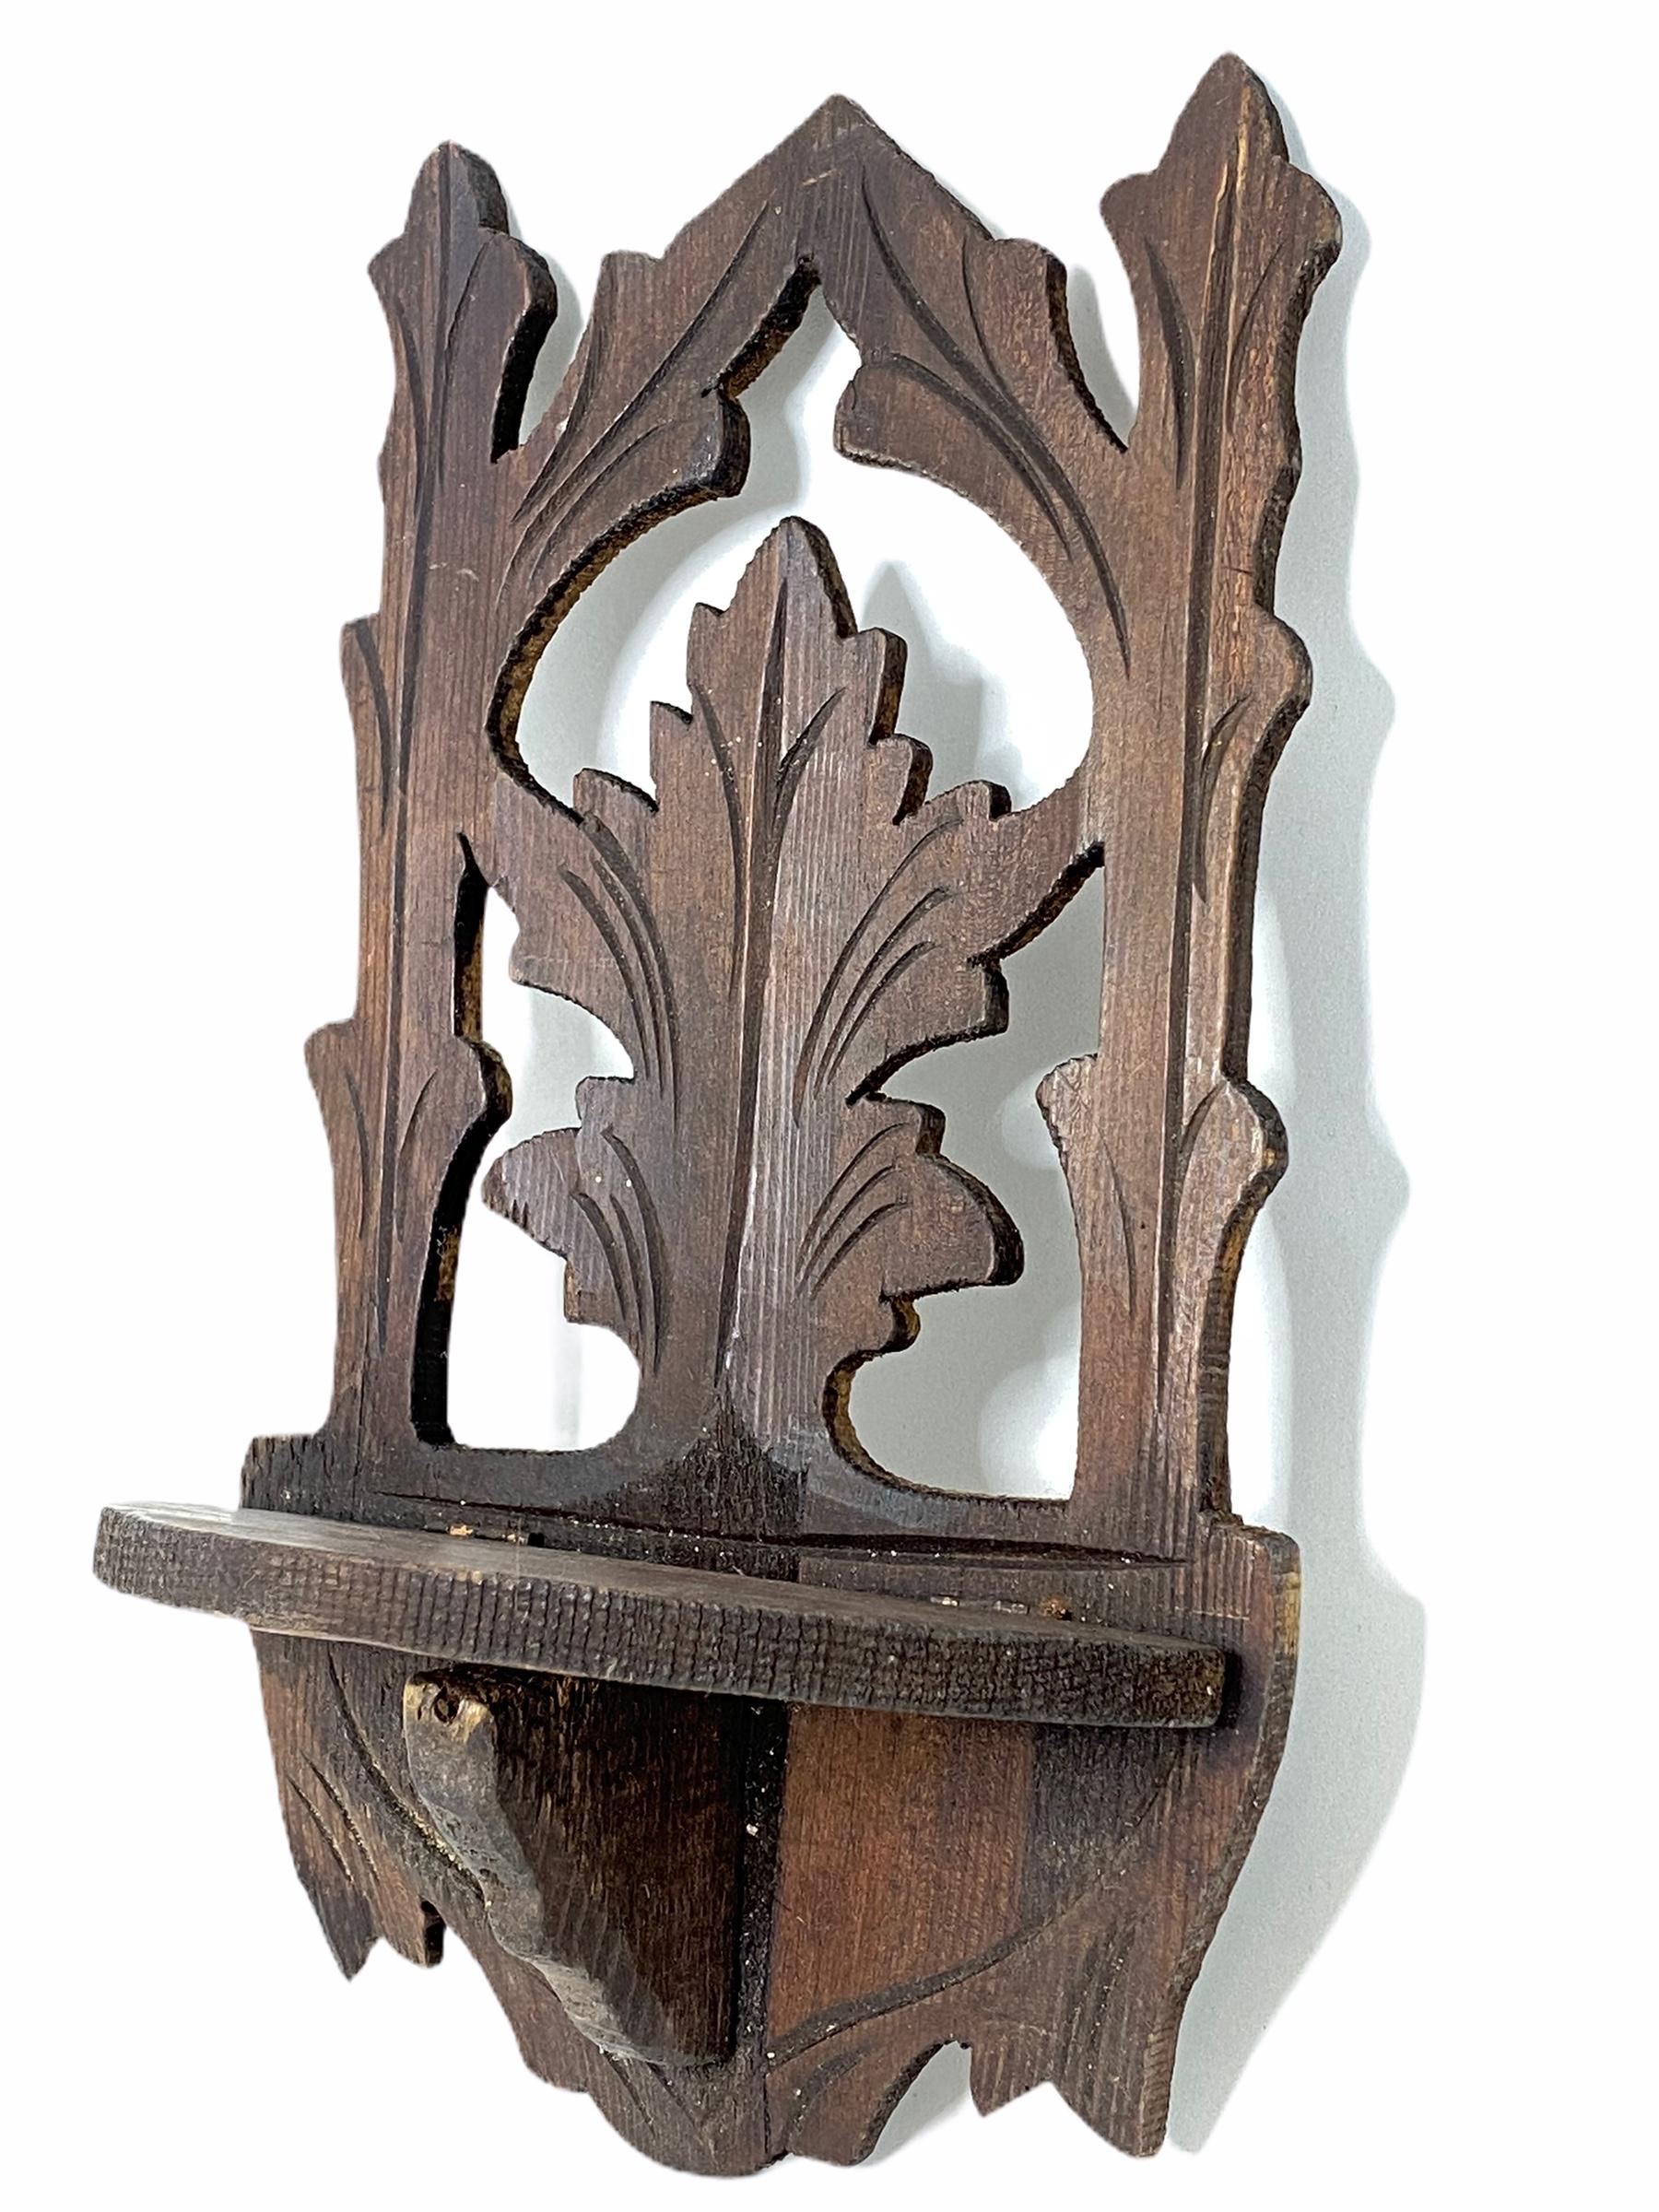 A lovely little shelf made of hand carved wood, made in the black forest area in Germany. Found at an estate sale in Nuremberg, Germany. It is not marked. A nice addition to your collection. It is in very good as found condition.